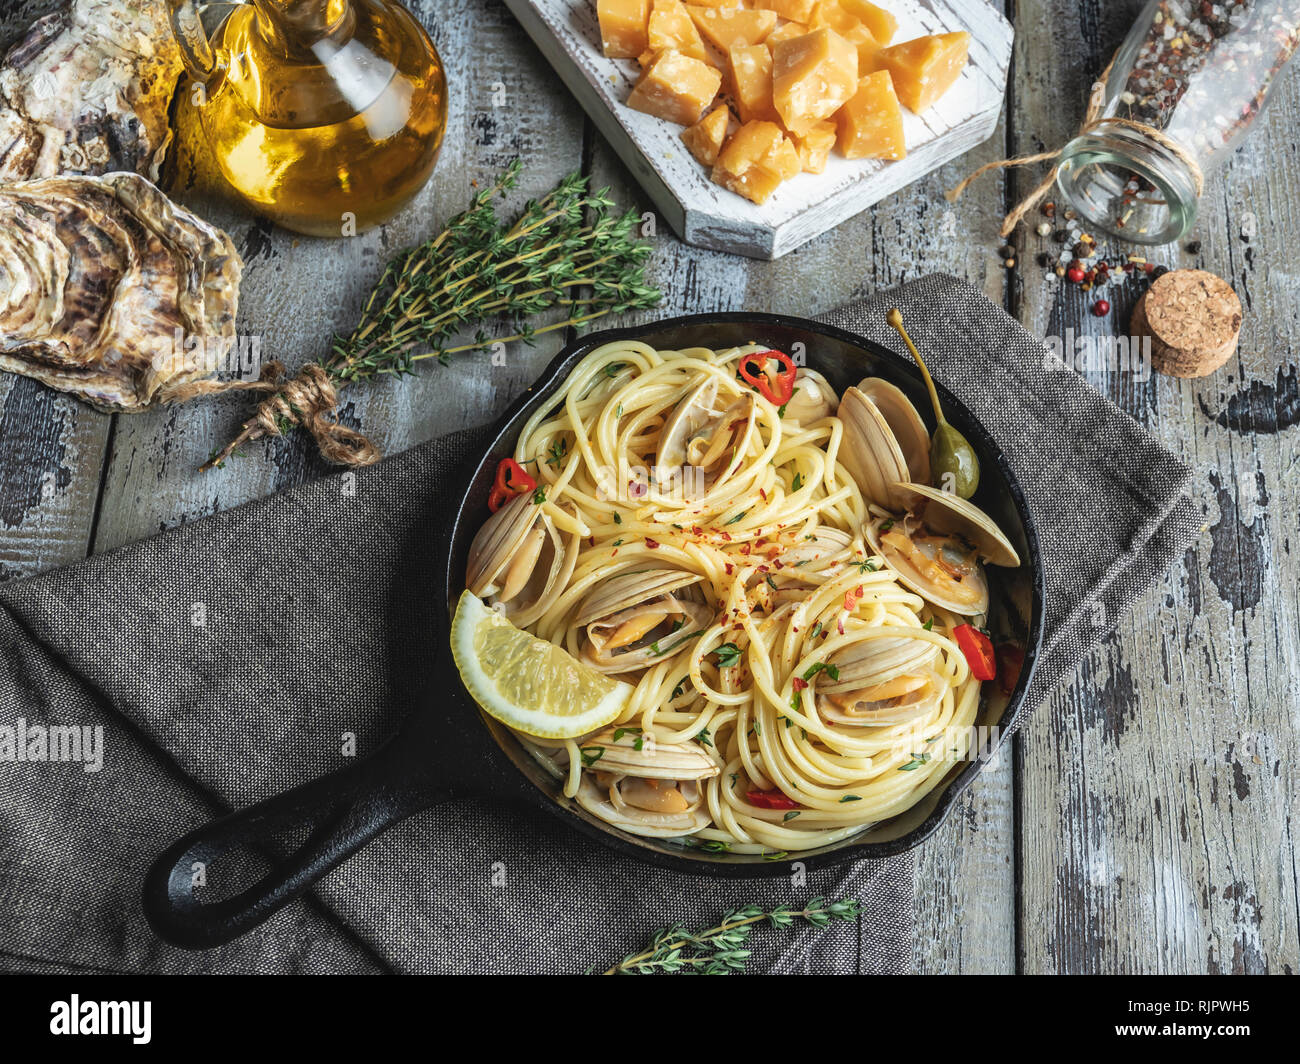 Pasta with seafood, shellfish clams in the iron pan portion, with lemon and seasoning Stock Photo